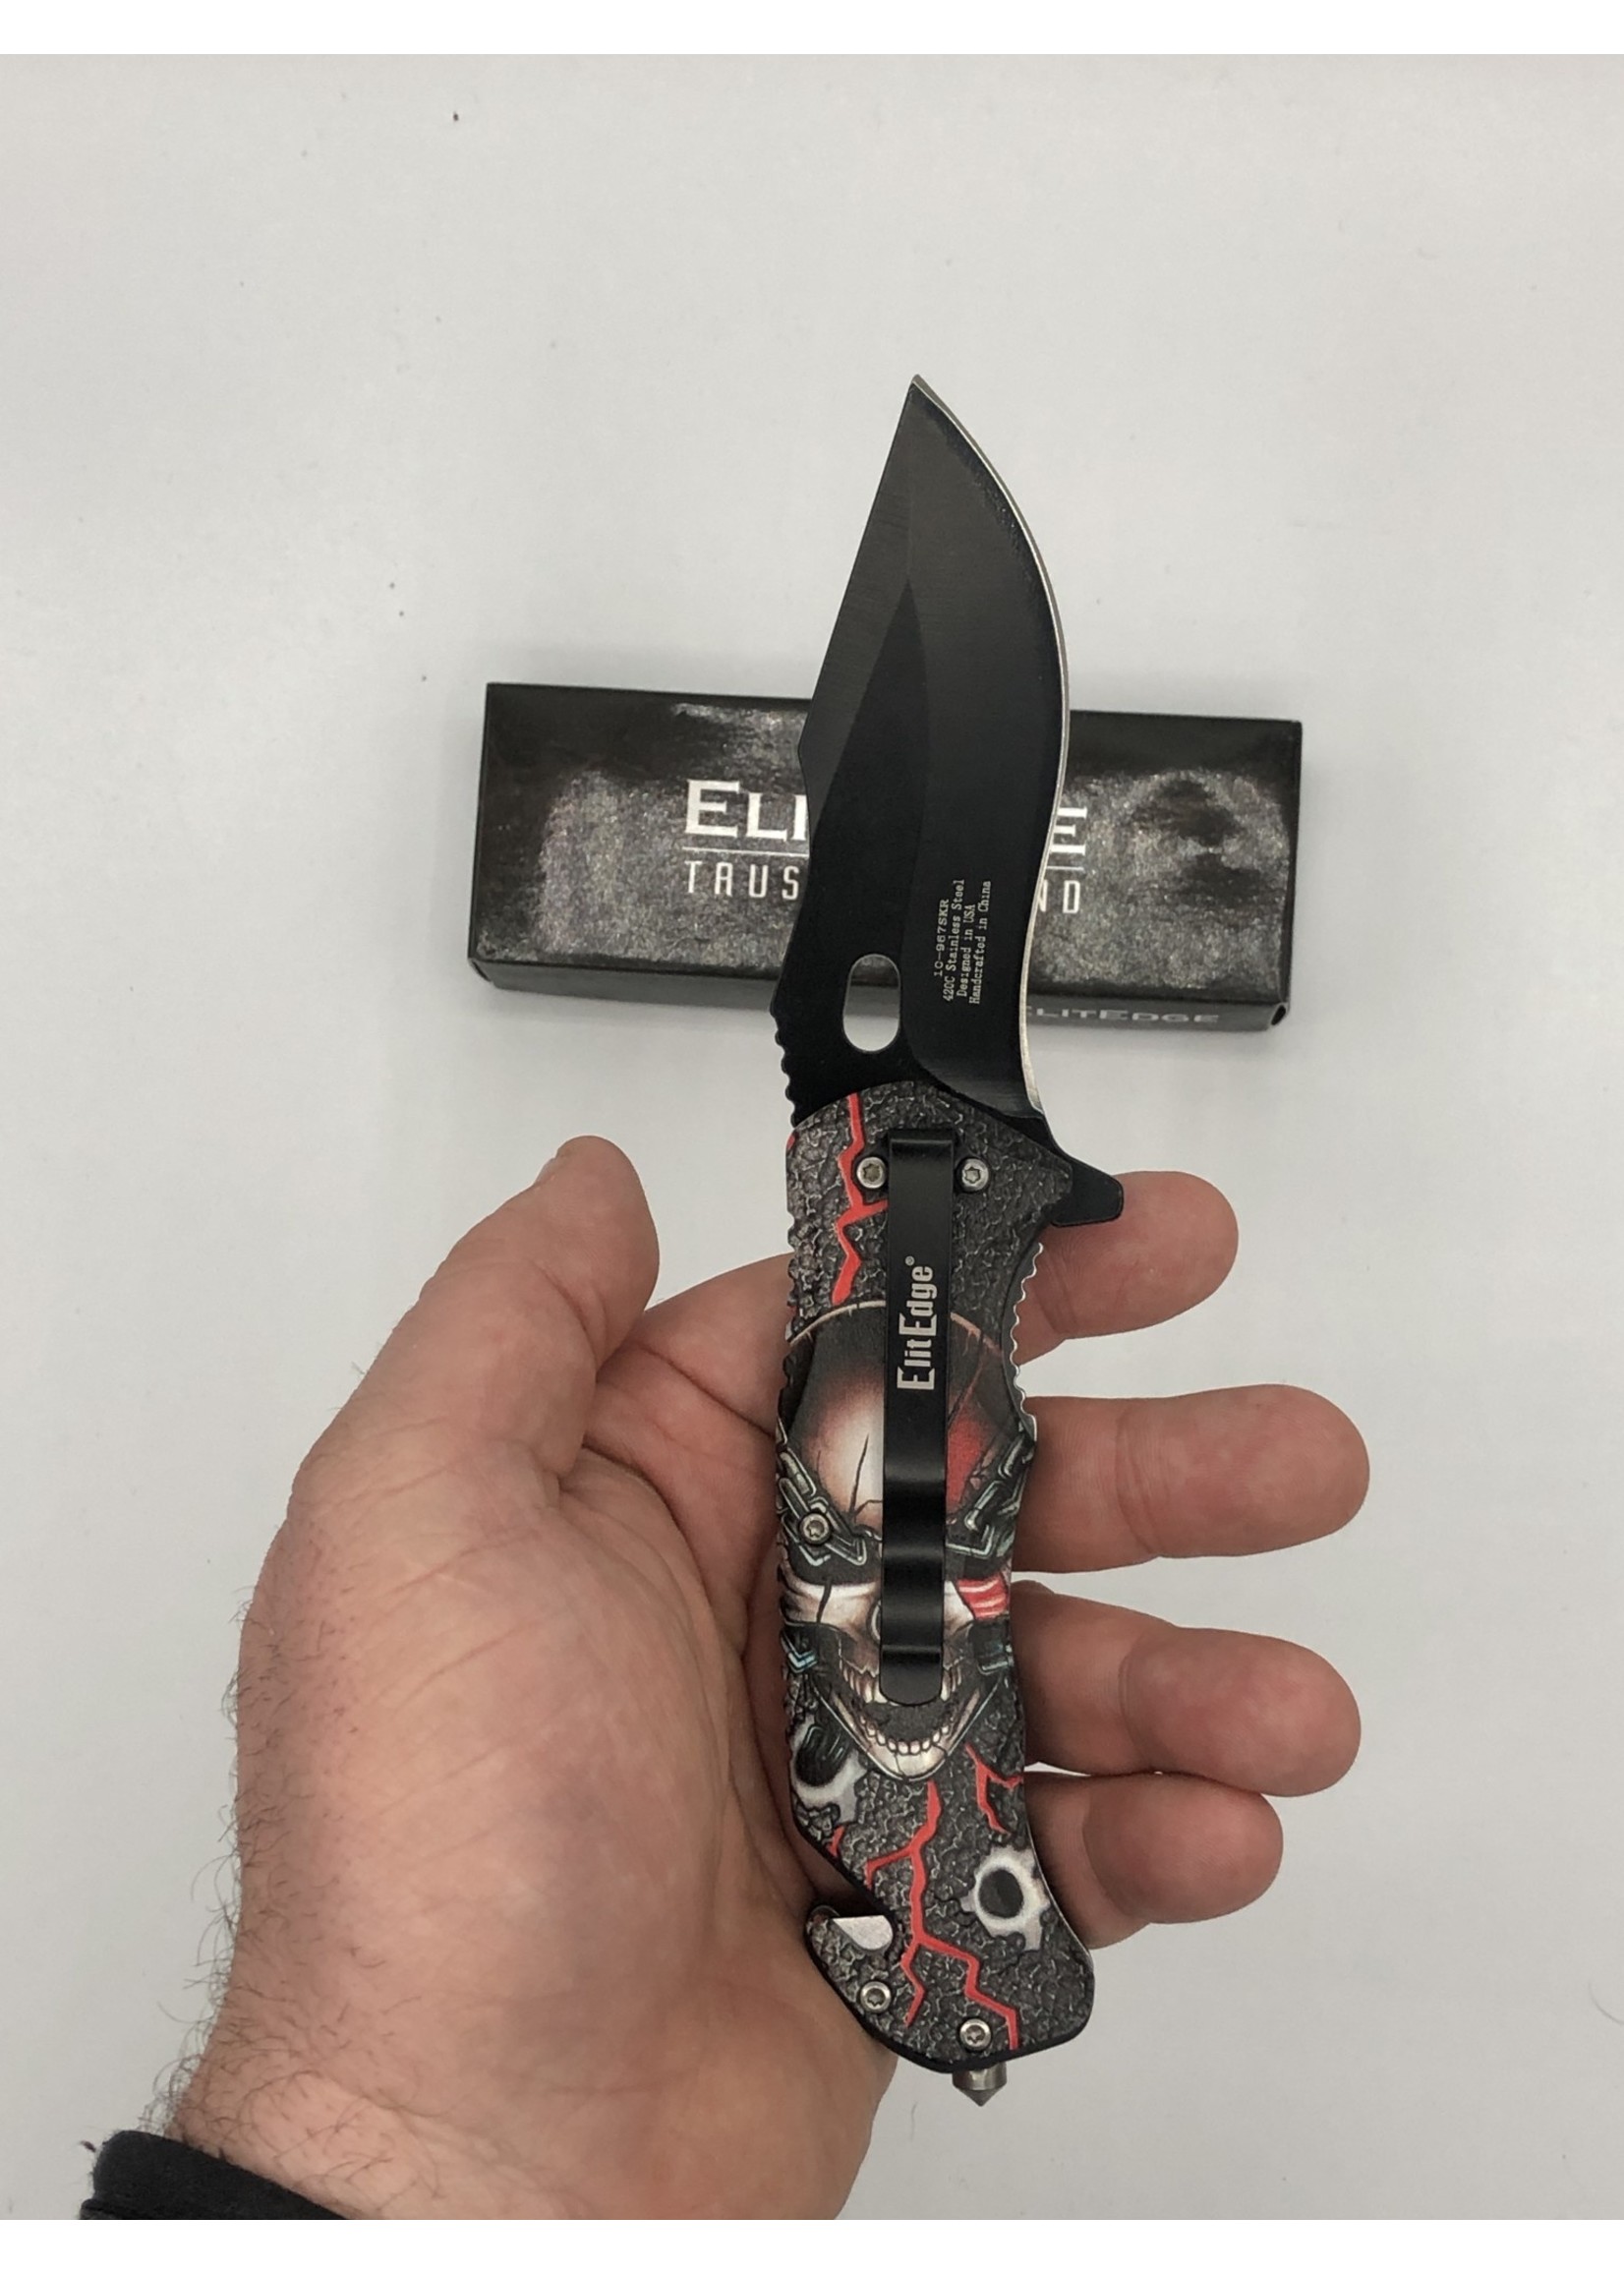 Knives Skull w/ Red Rescue Knife - Window breaker,  This product is a safety tool that combines a skull design with a red rescue knife